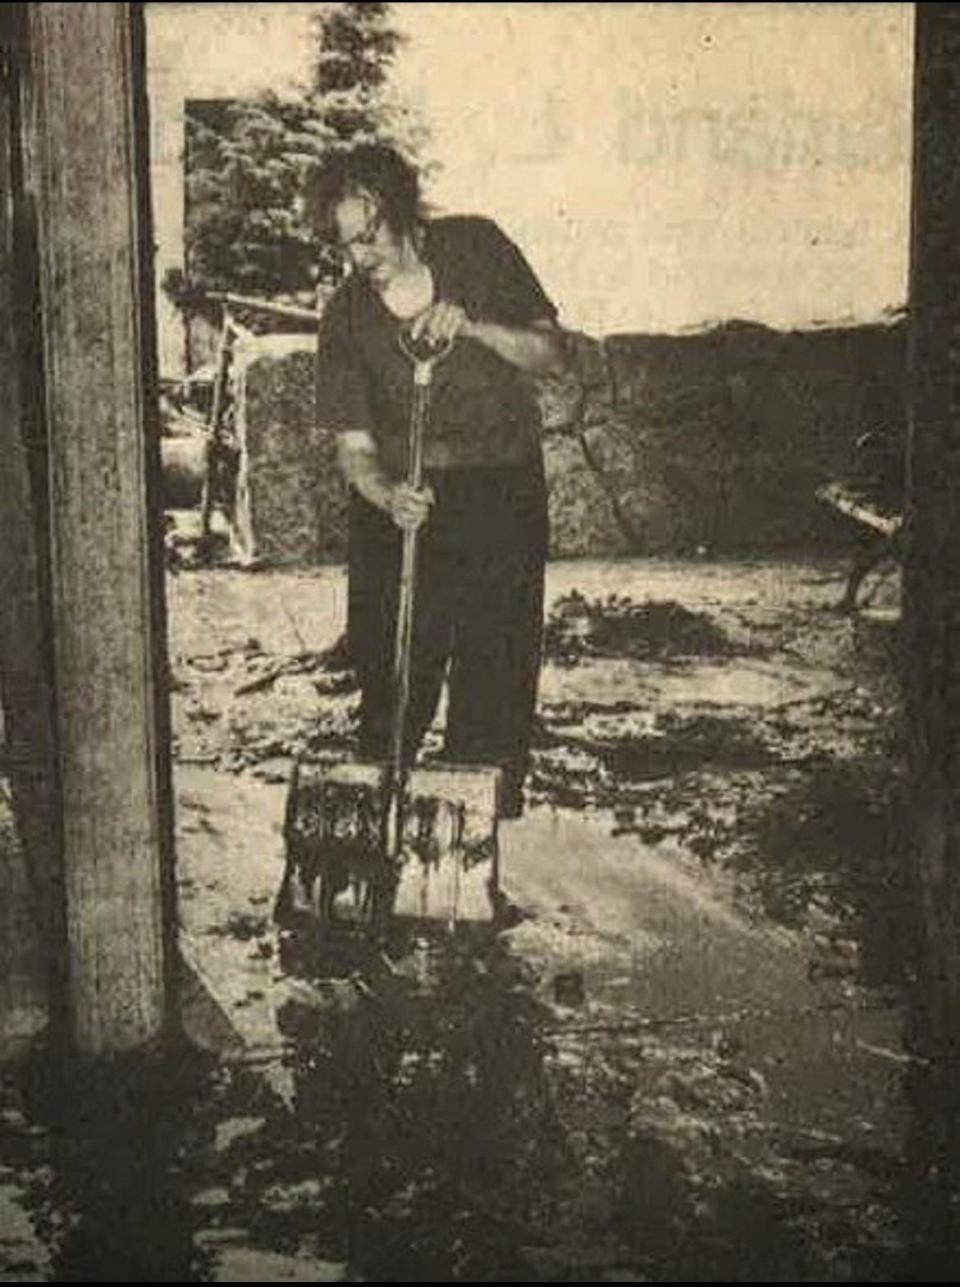 Park Theatre co-owner Olga Stranger shovels mud from the theatre's lobby in Estes Park, Colo., on July 15, 1982, after the Lawn Lake dam breached above the town.